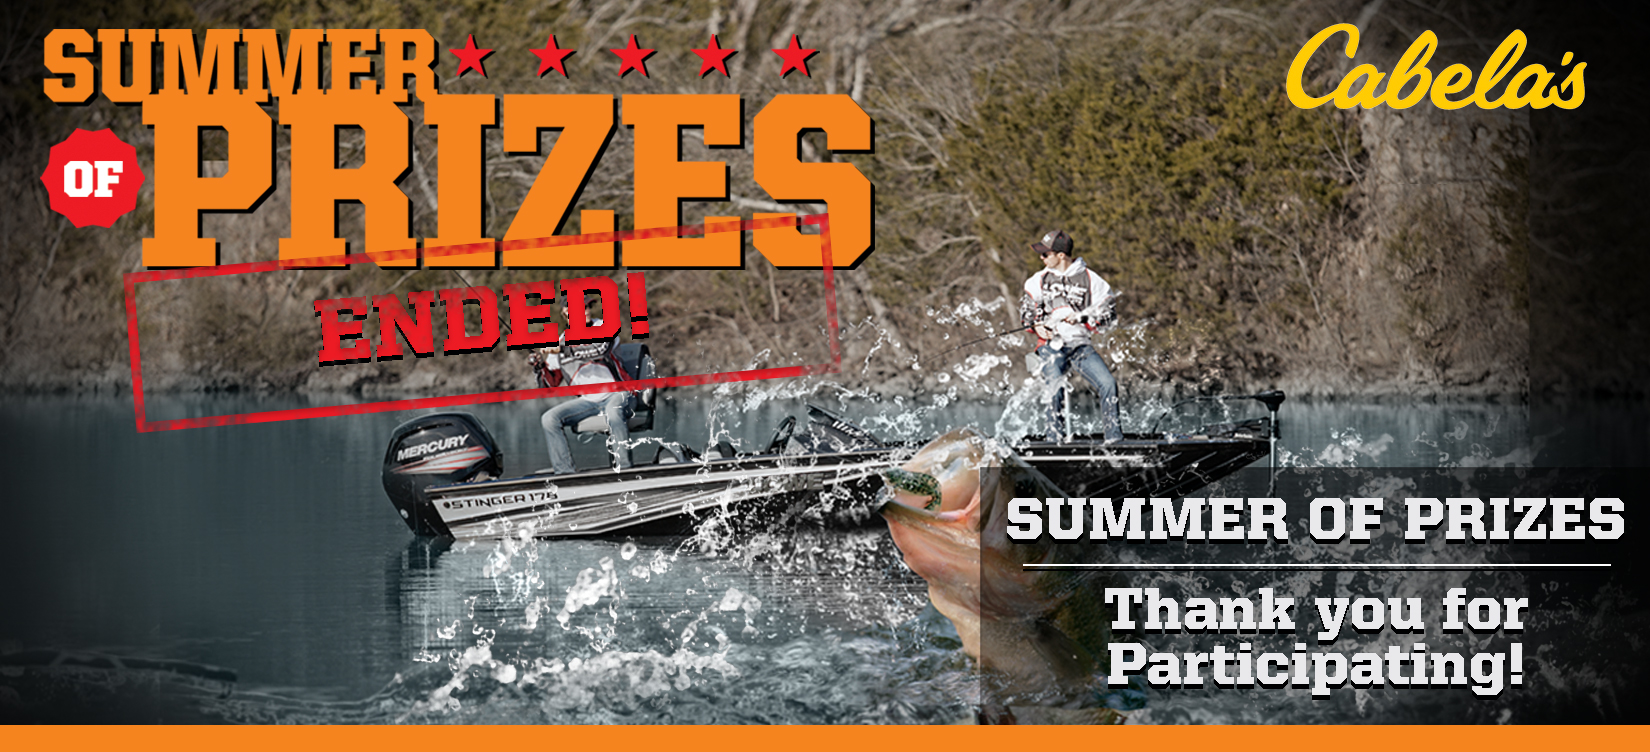 Lowe Boats and Cabela's Summer of Prizes 2016